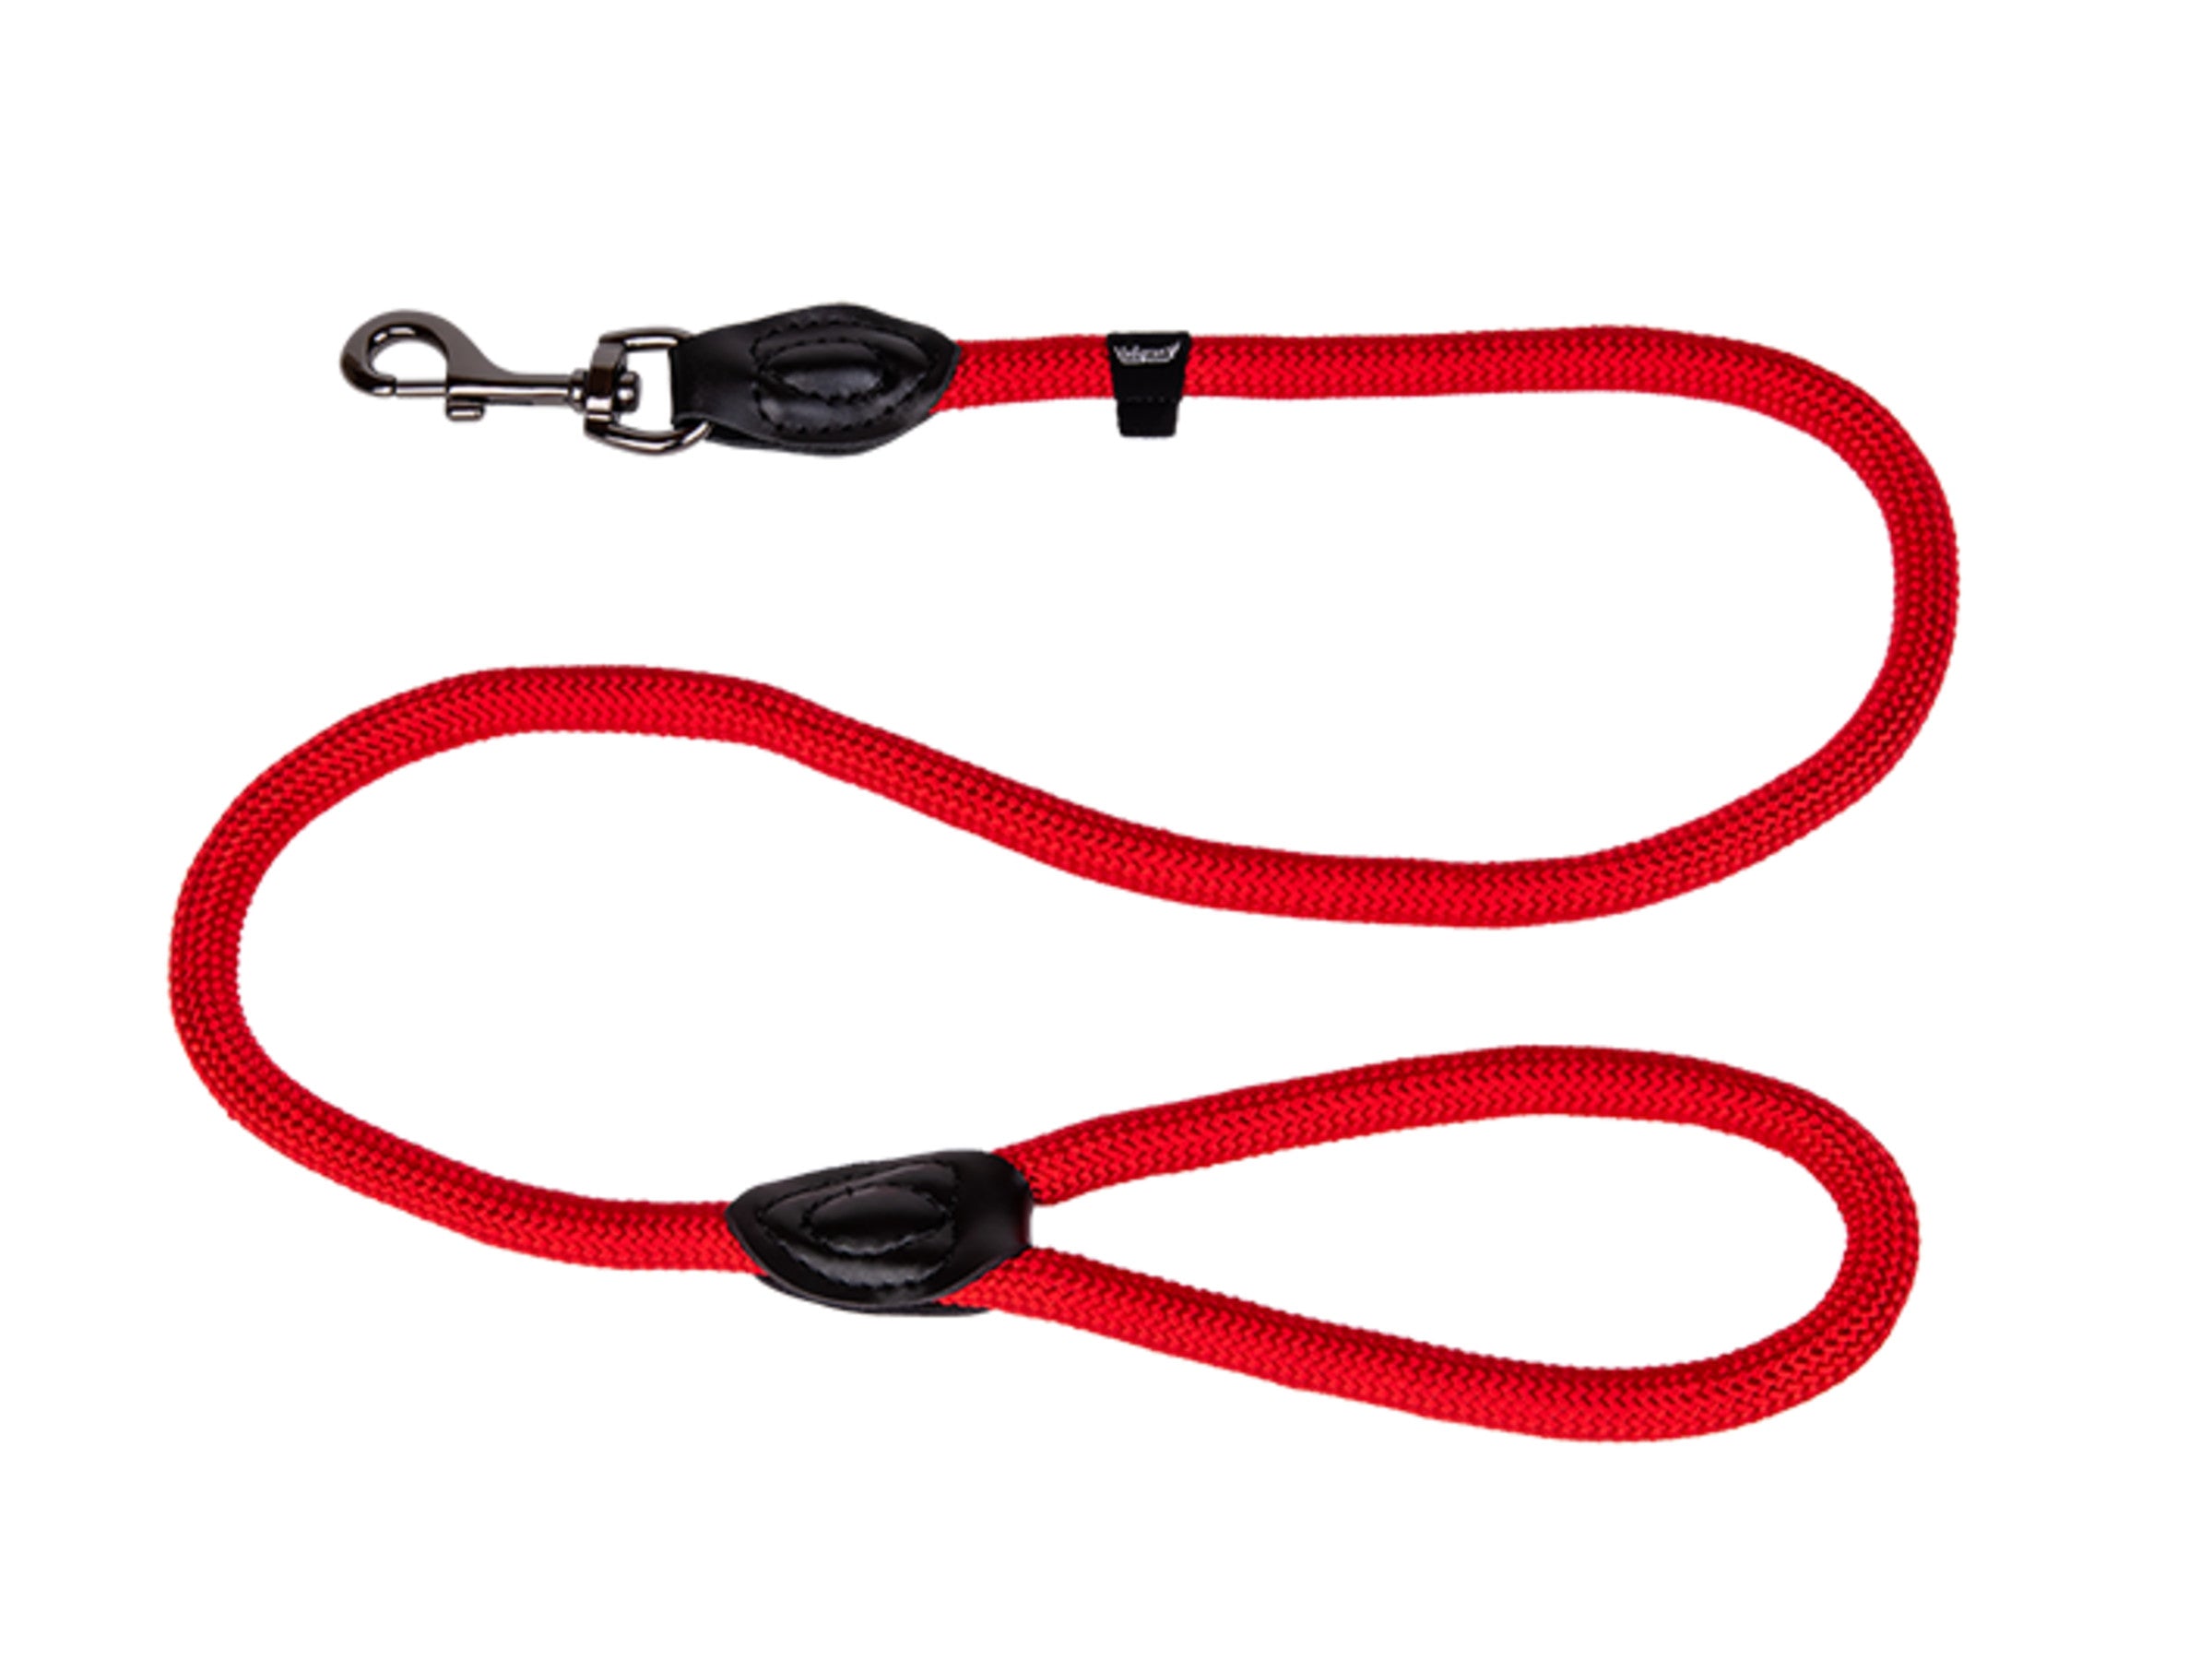 Leiband Classic Nylon rond rood 120cm - Pip & Pepper by Dierenspeciaalzaak Huysmans